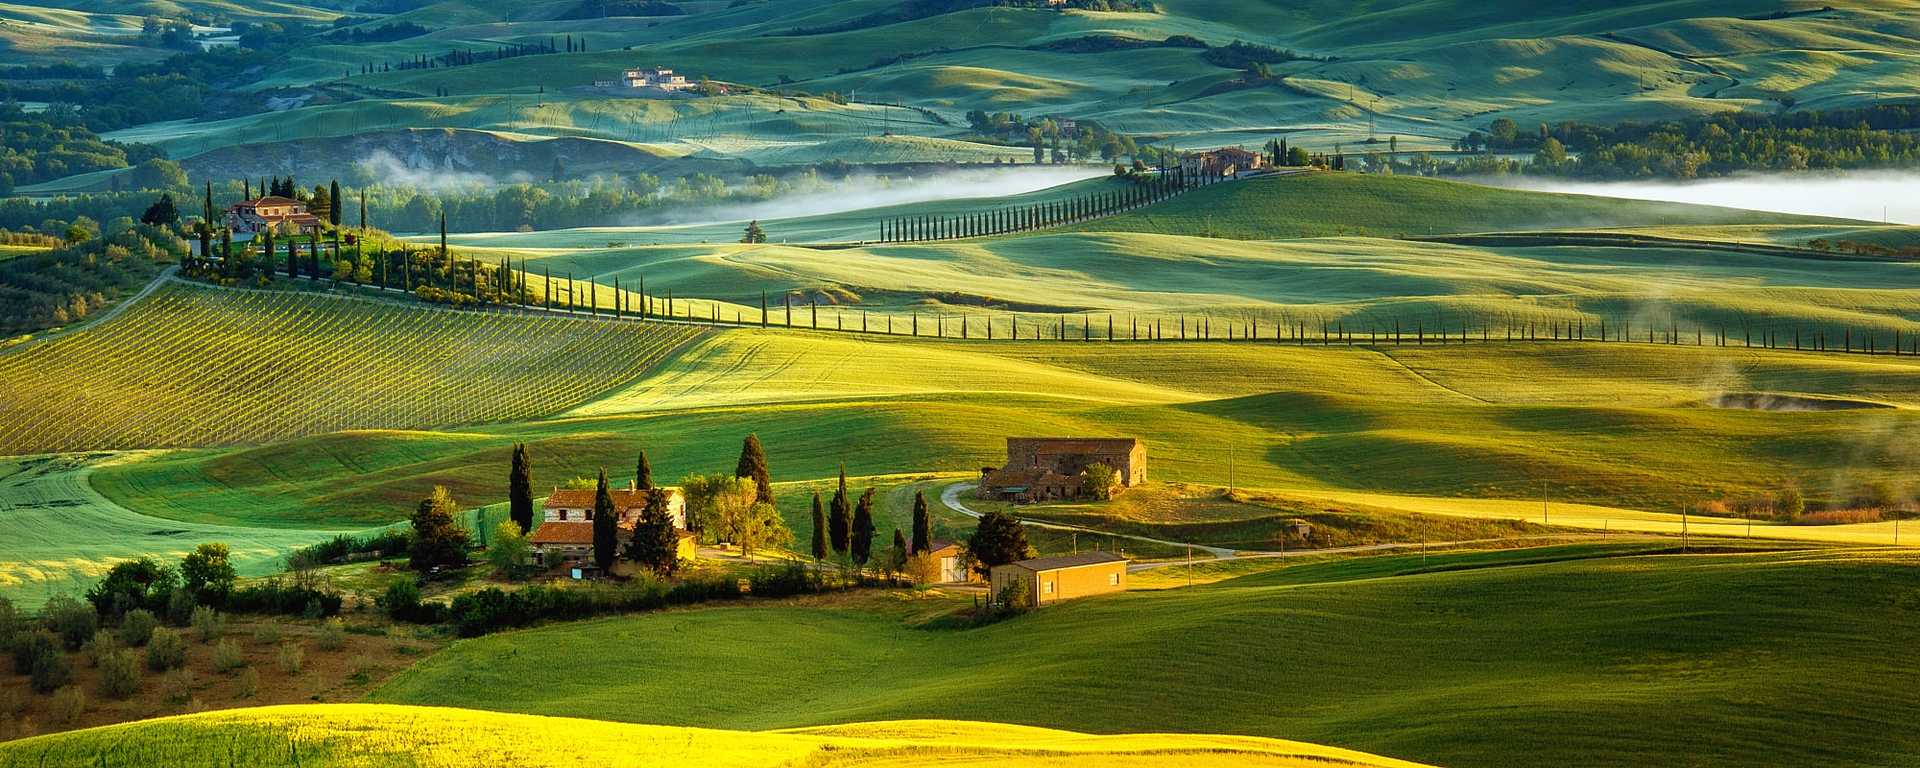 Best Tuscany Tours & Travel Packages 20232024 Zicasso